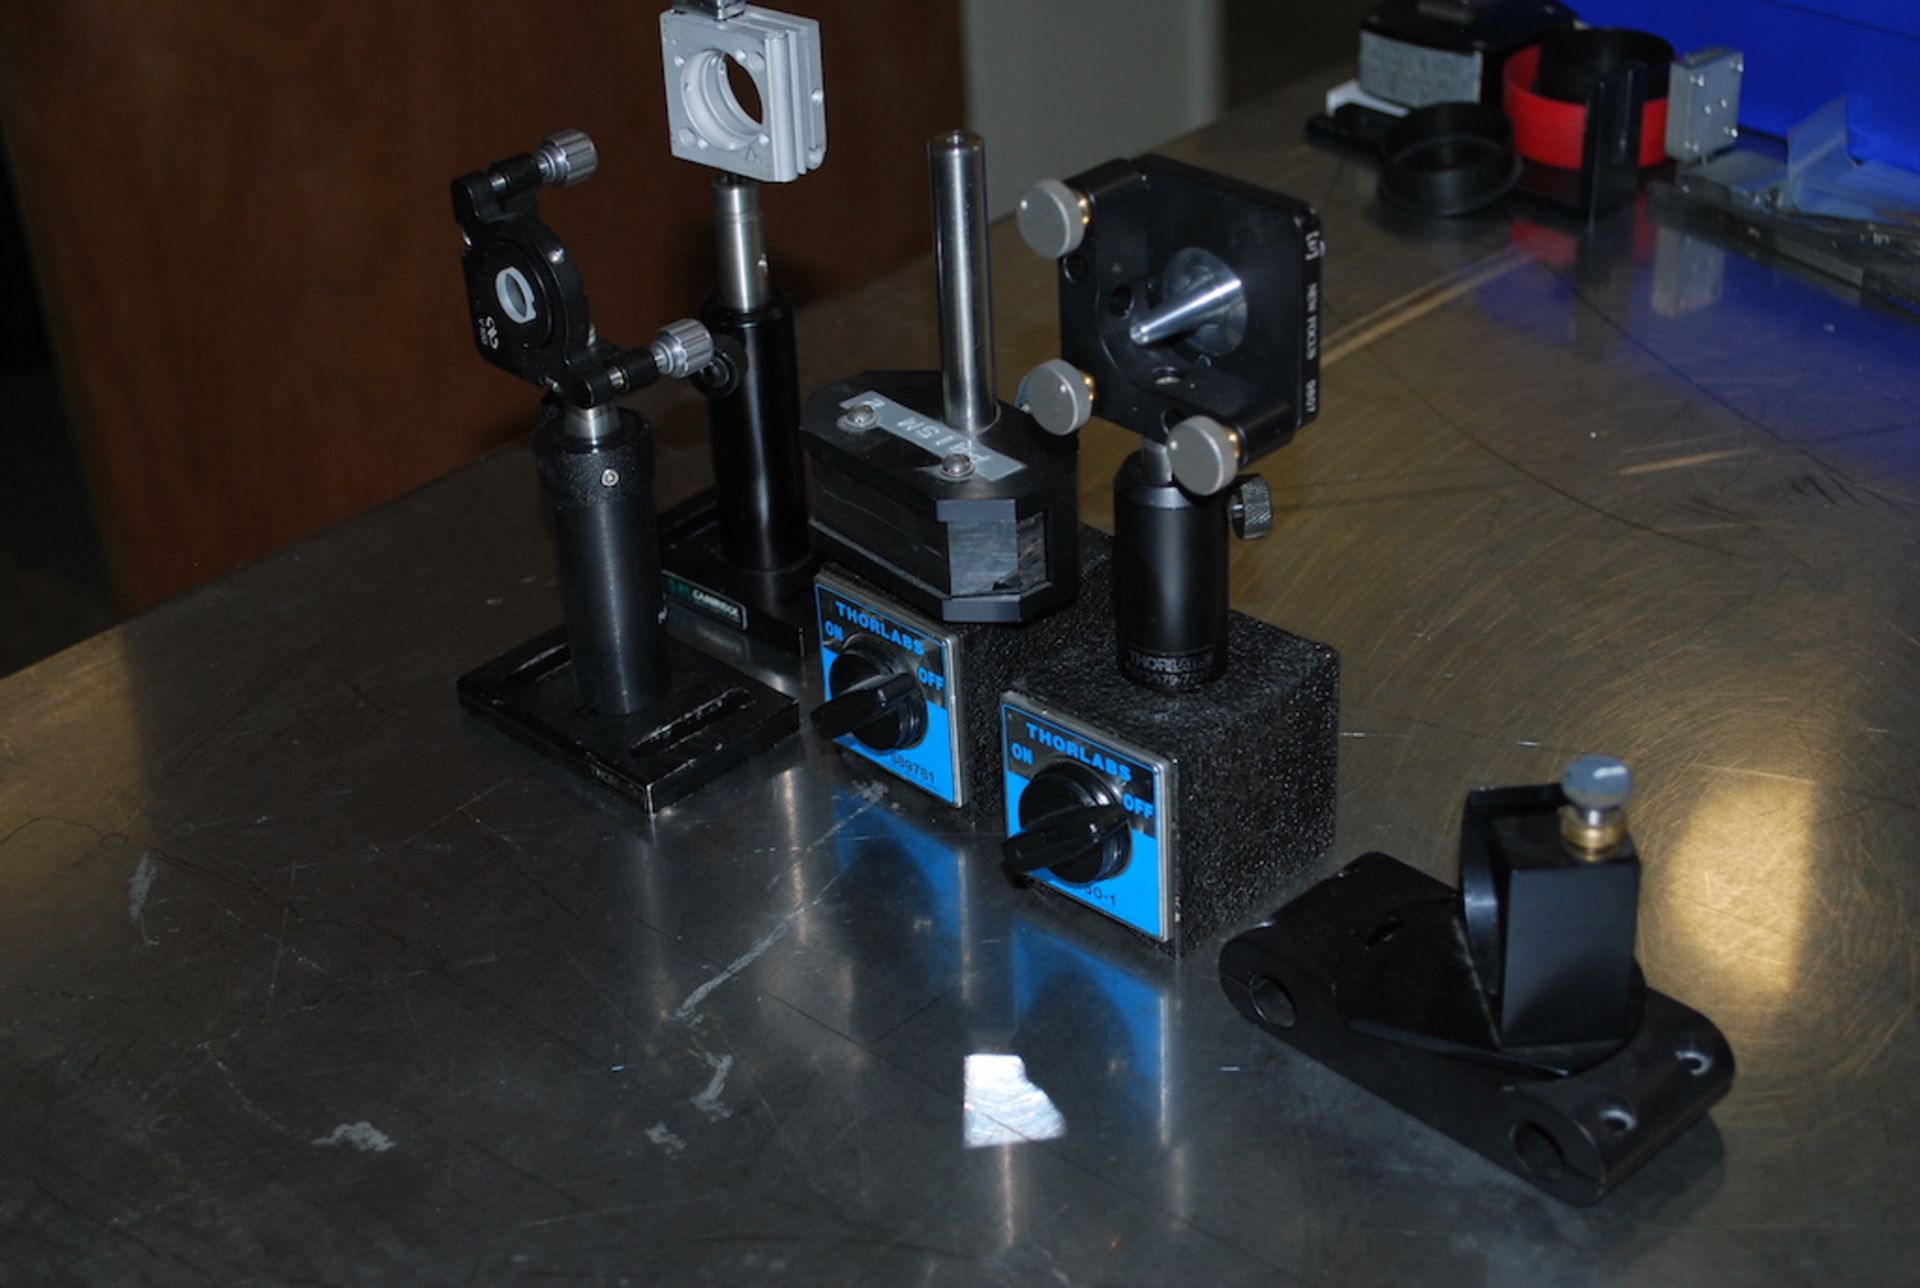 Qty-3 1" XY optical mounts on stands + Dispersion prism ( 25 % - 75% ratio ) - Image 4 of 14